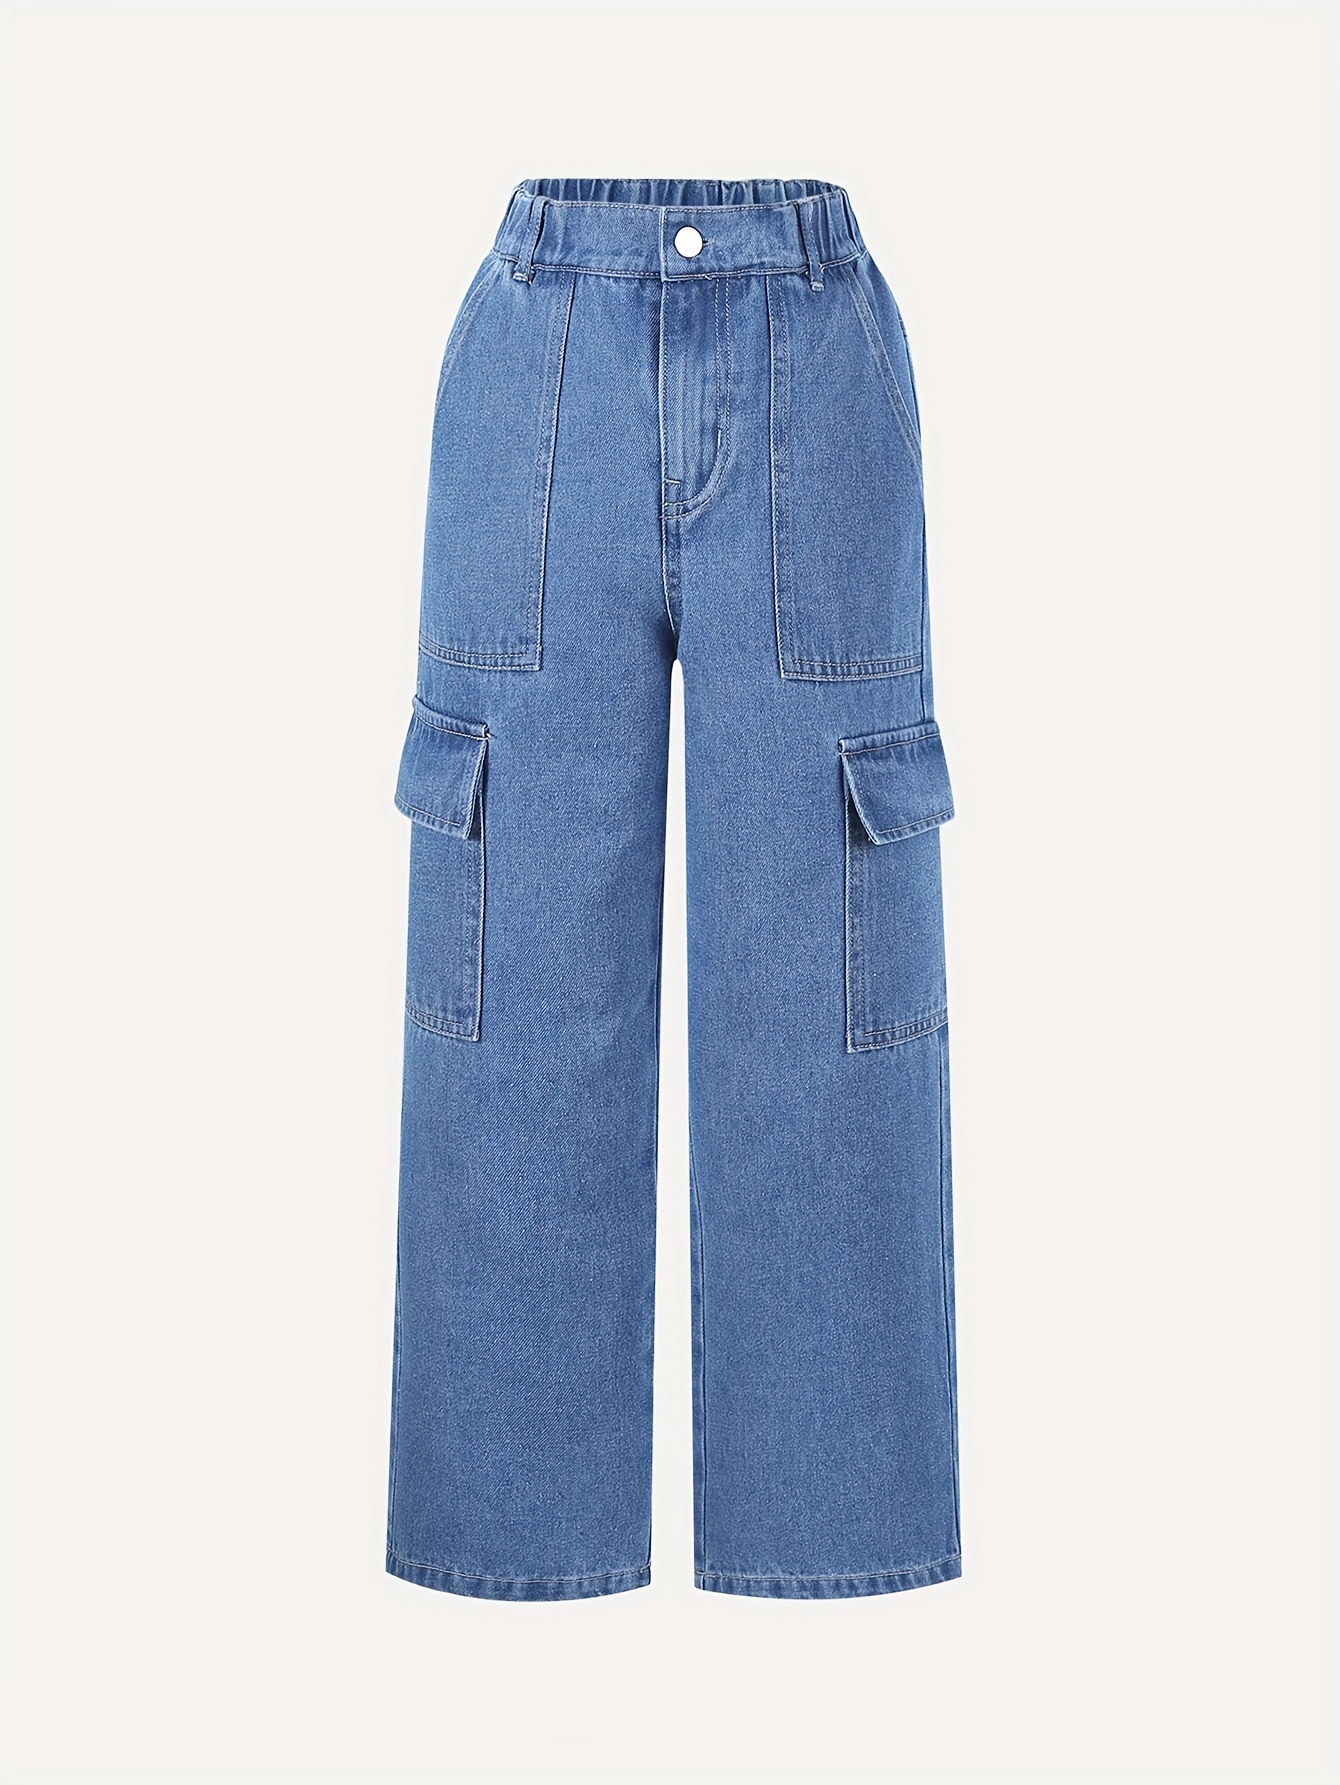 Trendy & Cool: Girls Light Washed Cargo Jeans All-match Straight Wide Leg  Denim Trousers With Pockets For Going Out